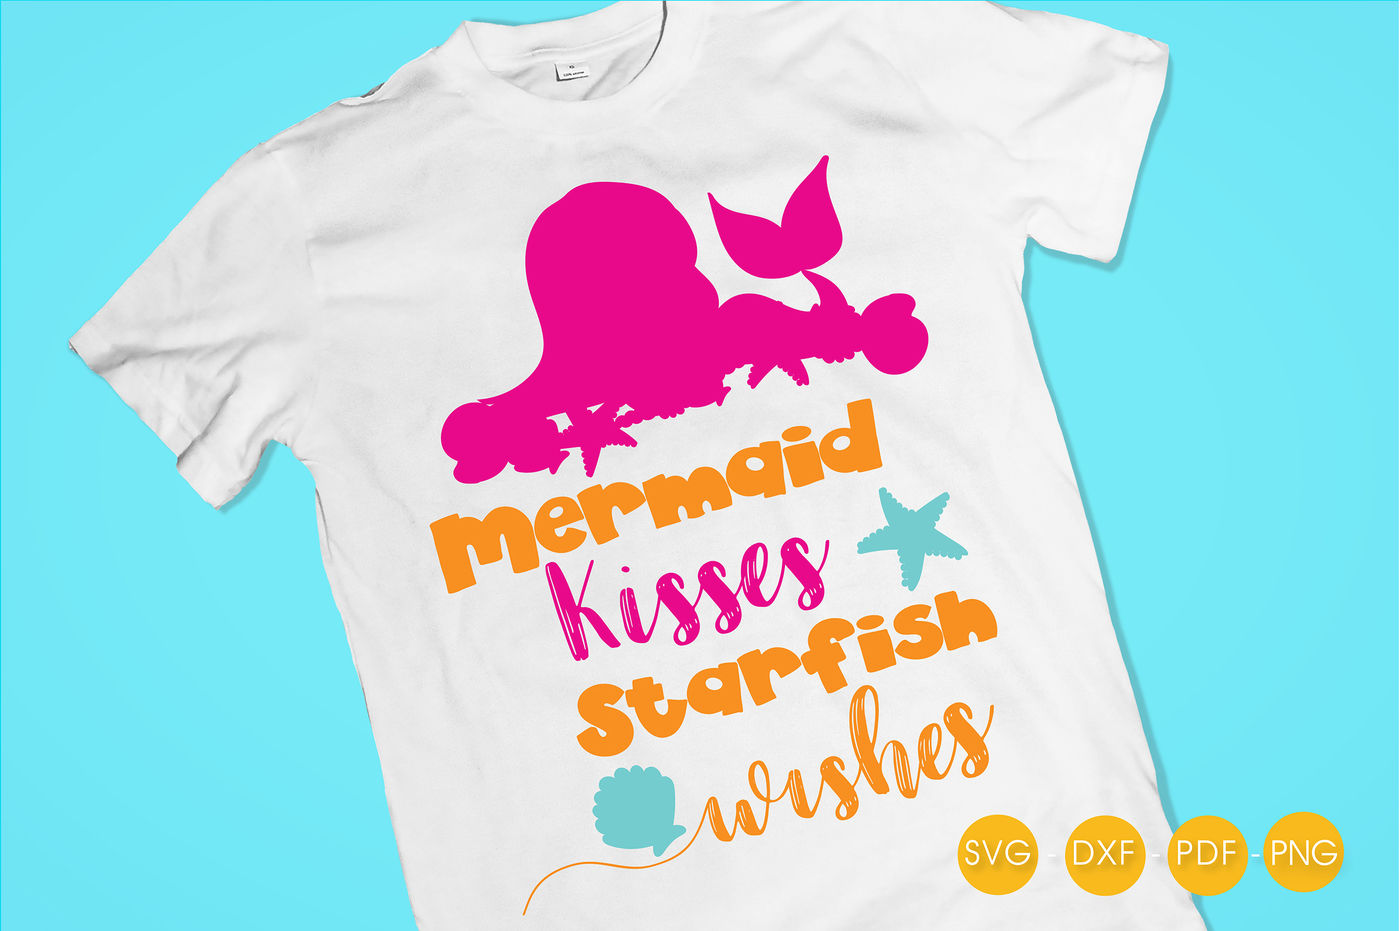 ori 3464962 76bd5d9d8496d64c8503d00630b19d5dbc7864aa mermaid kisses starfish wishes svg png eps dxf cut file